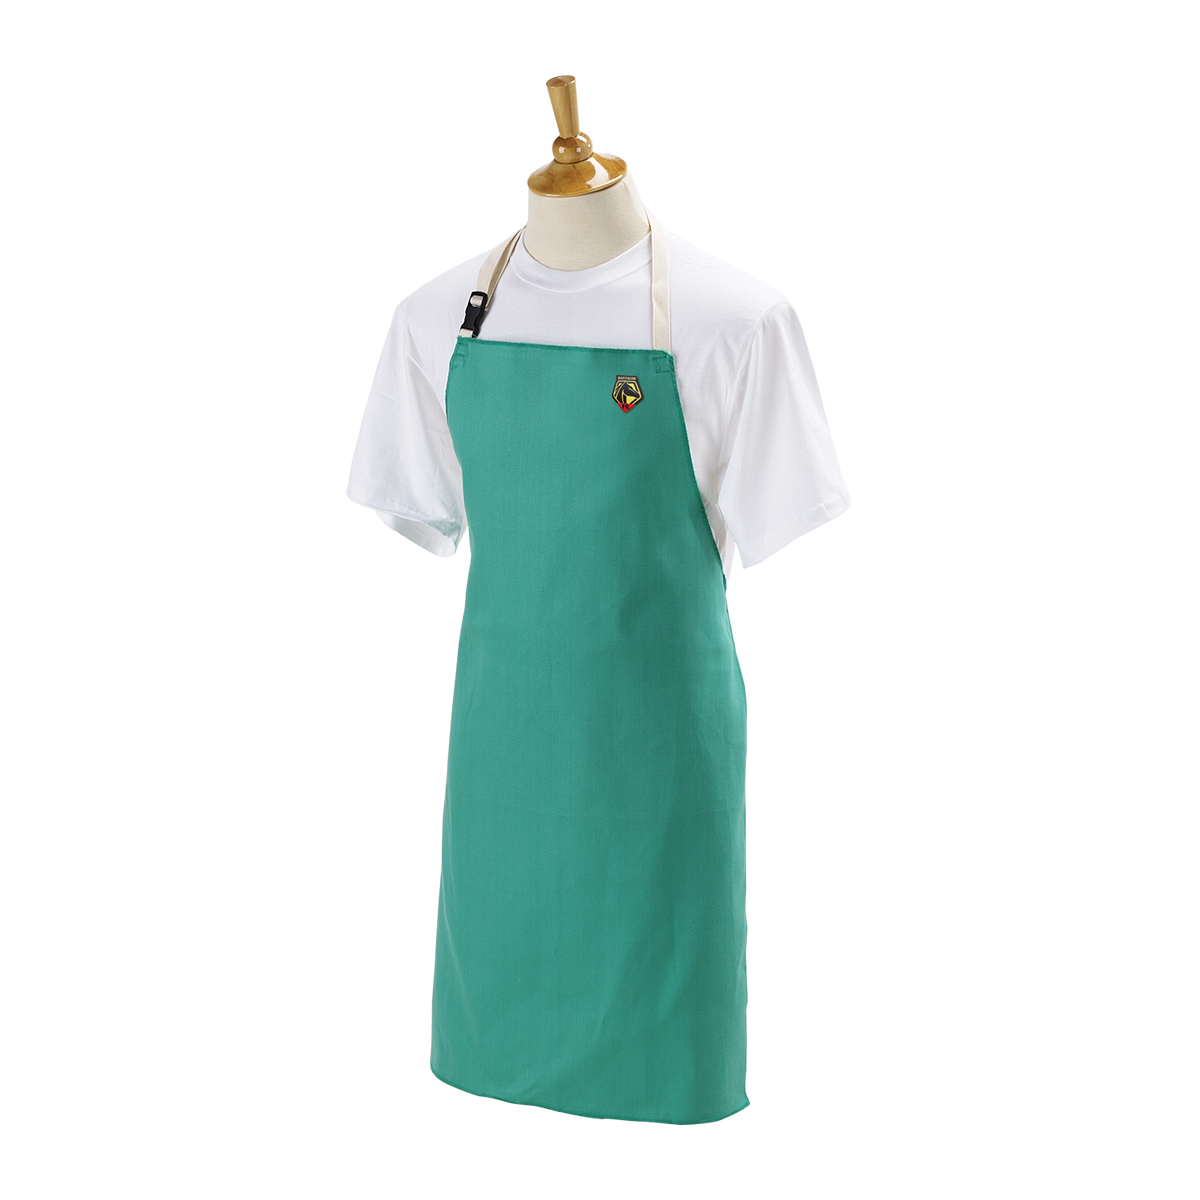 Black Stallion 36 Inch Flame-Resistant Cotton Bib Apron from Columbia Safety